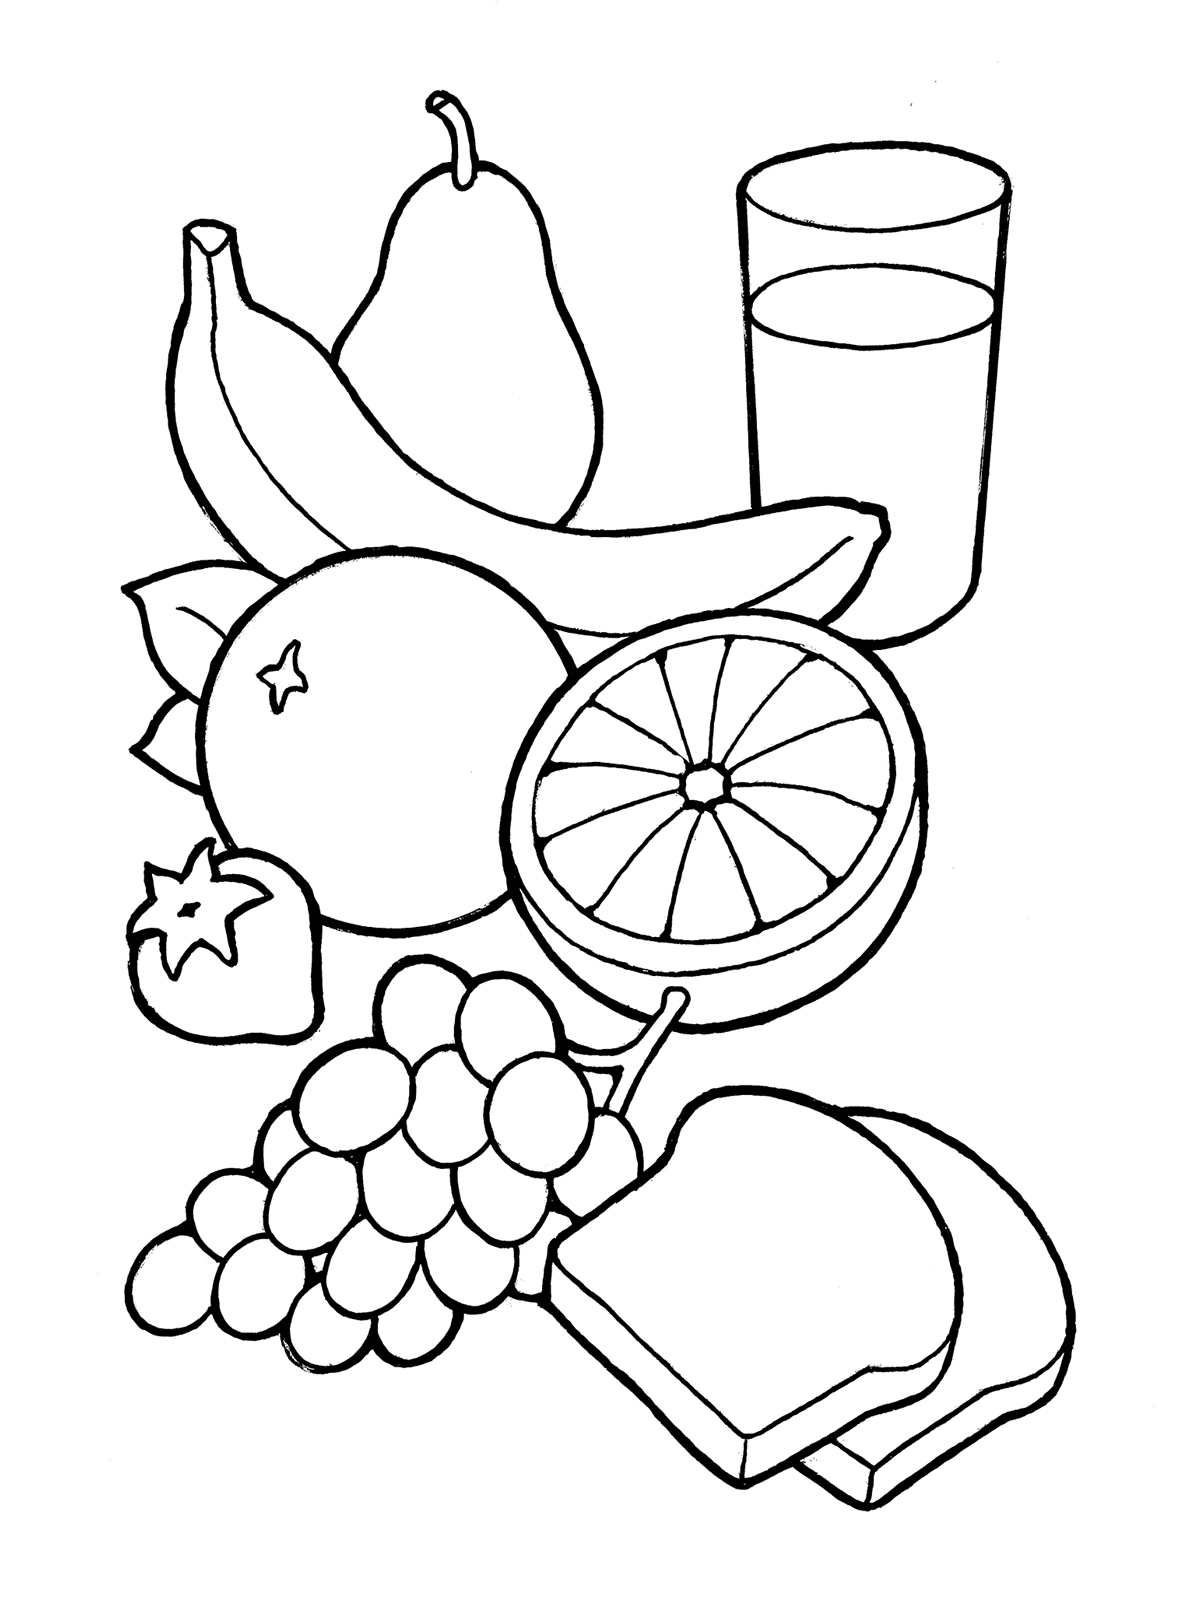 Health food clipart black and white 